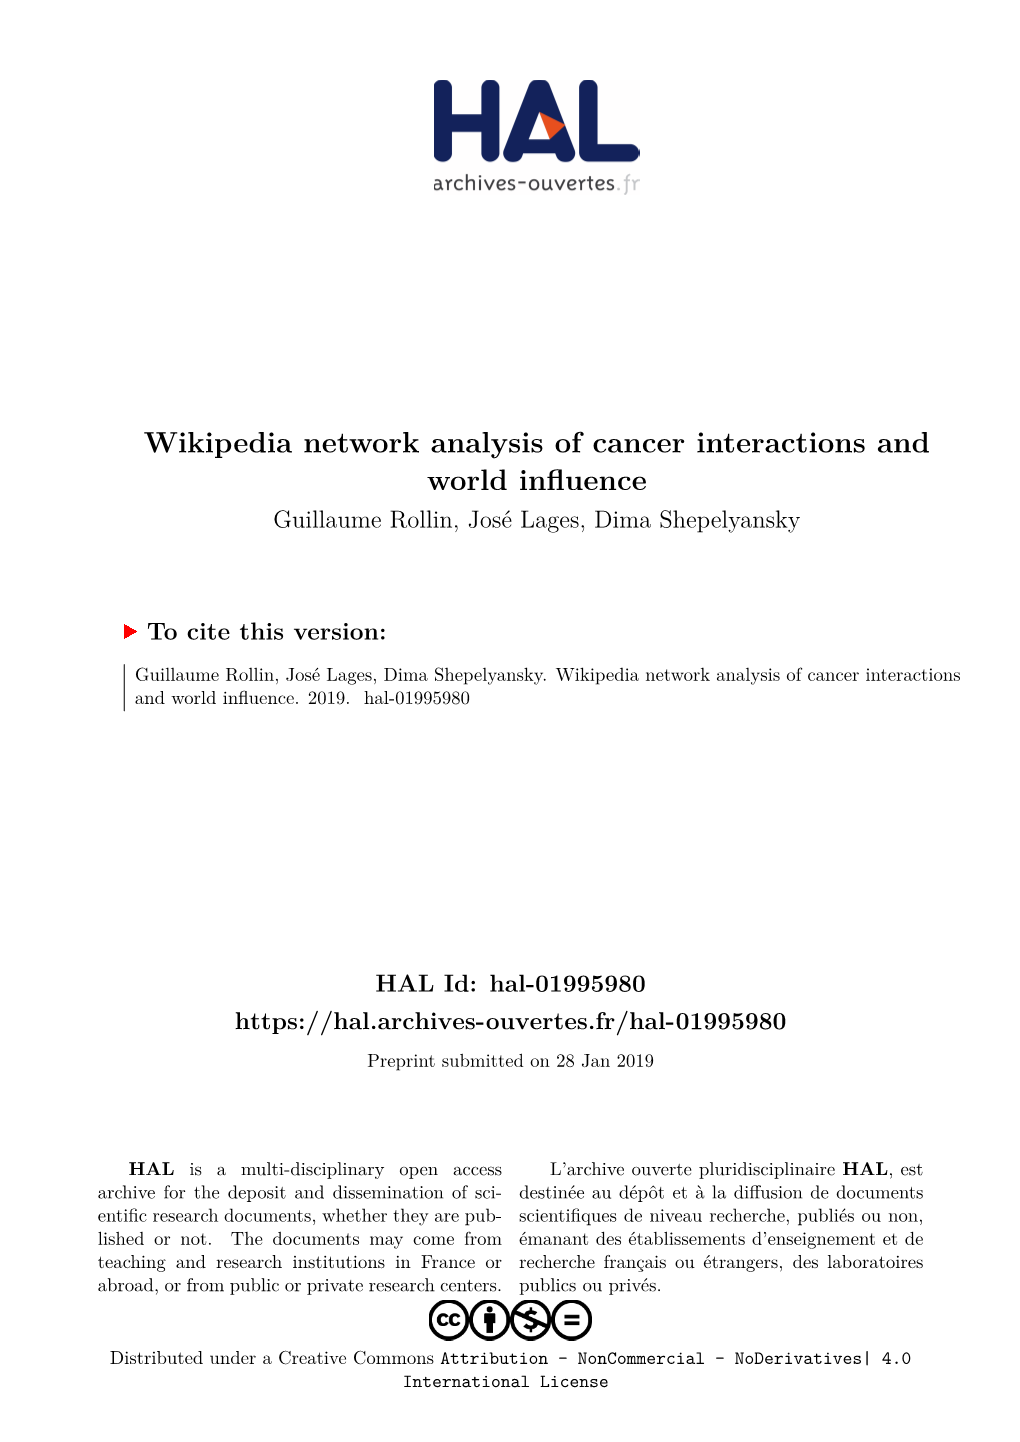 Wikipedia Network Analysis of Cancer Interactions and World Influence Guillaume Rollin, José Lages, Dima Shepelyansky